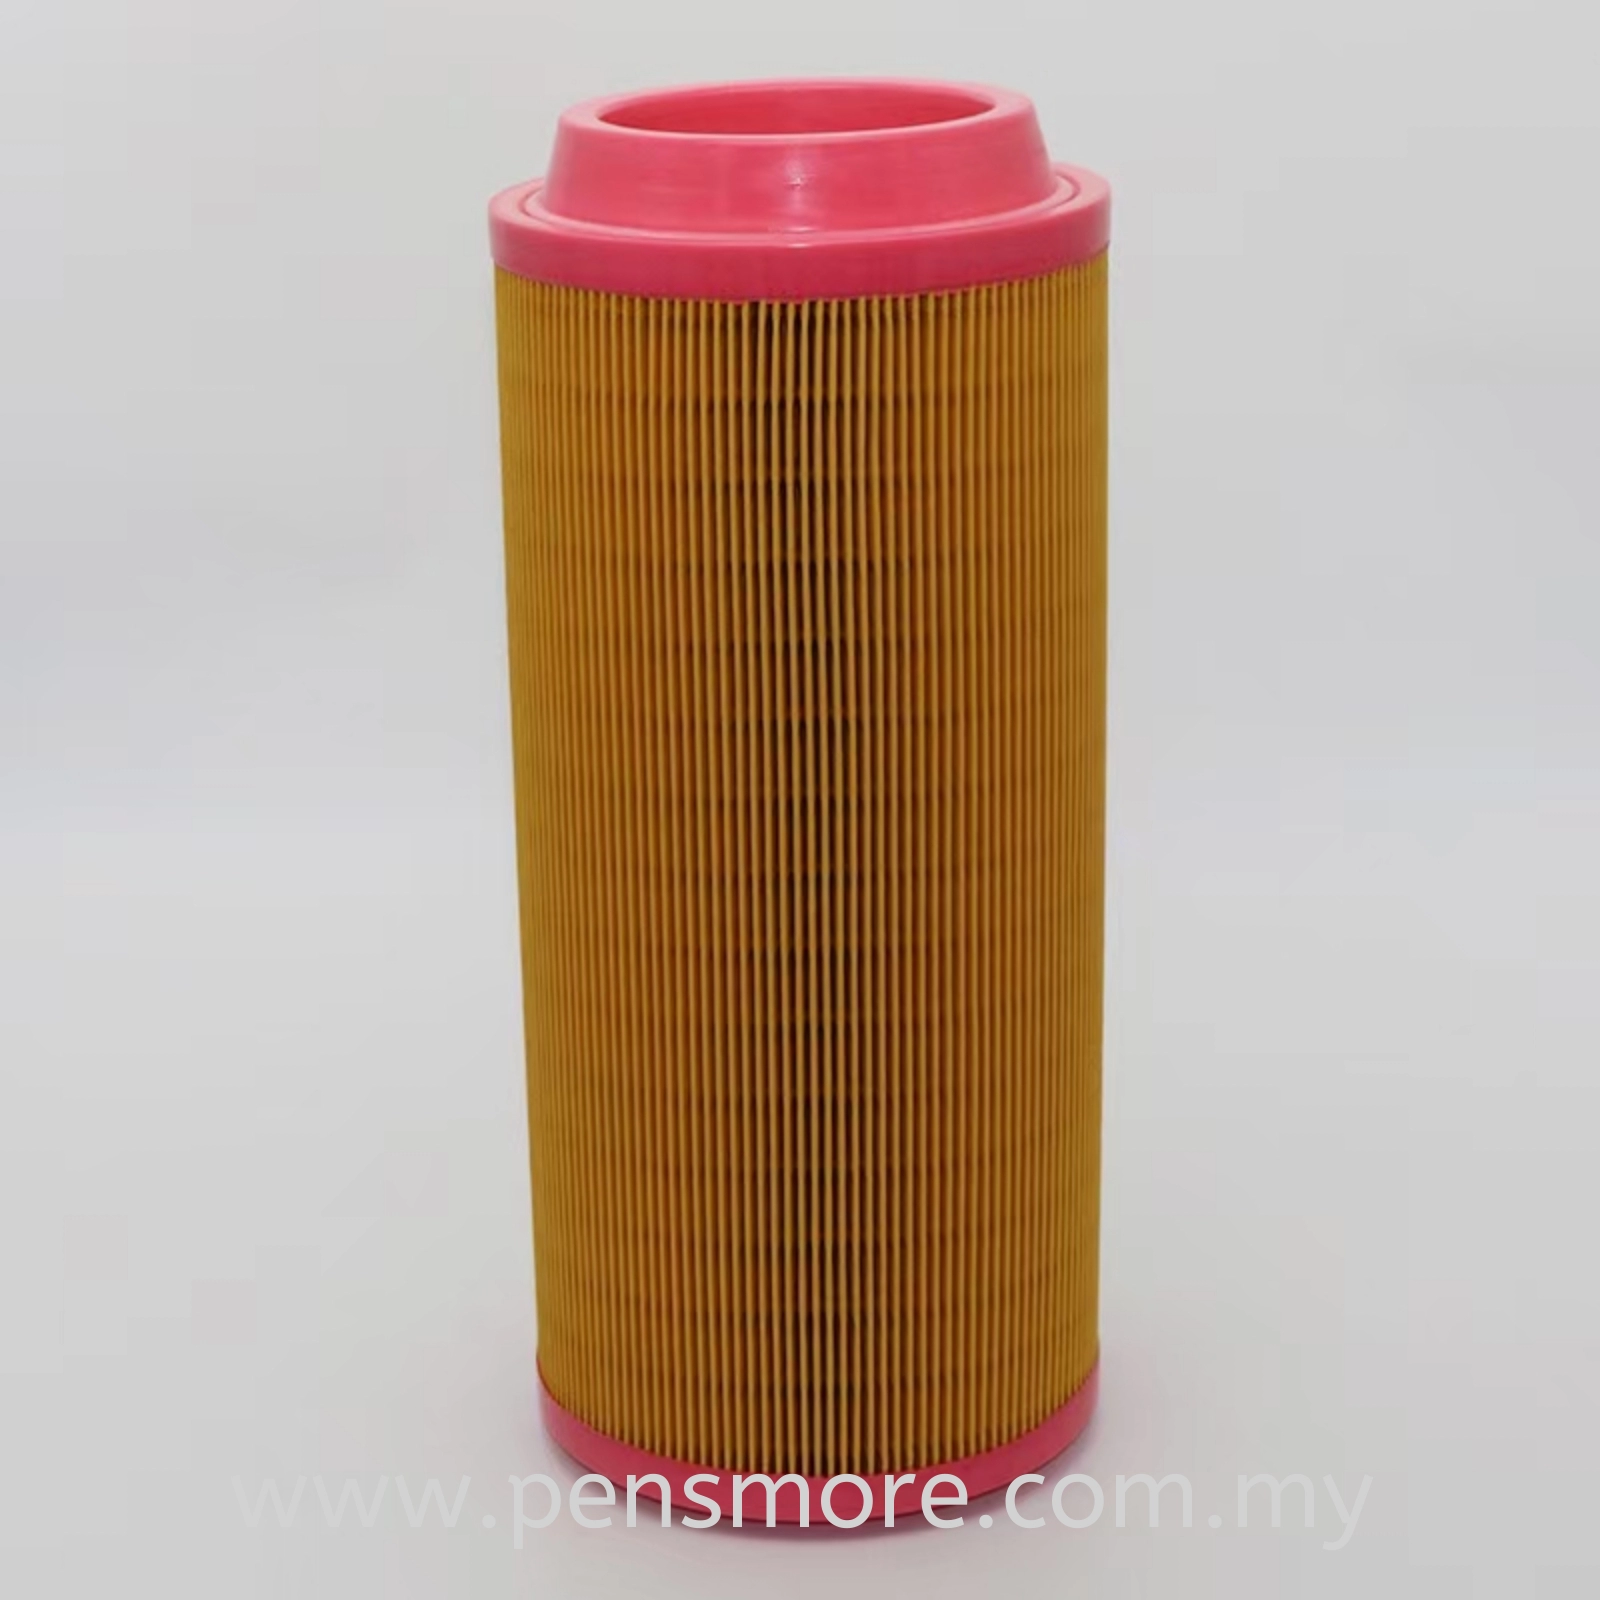 Air Filter, Suction Filter, 1613740700, 1613740800, 